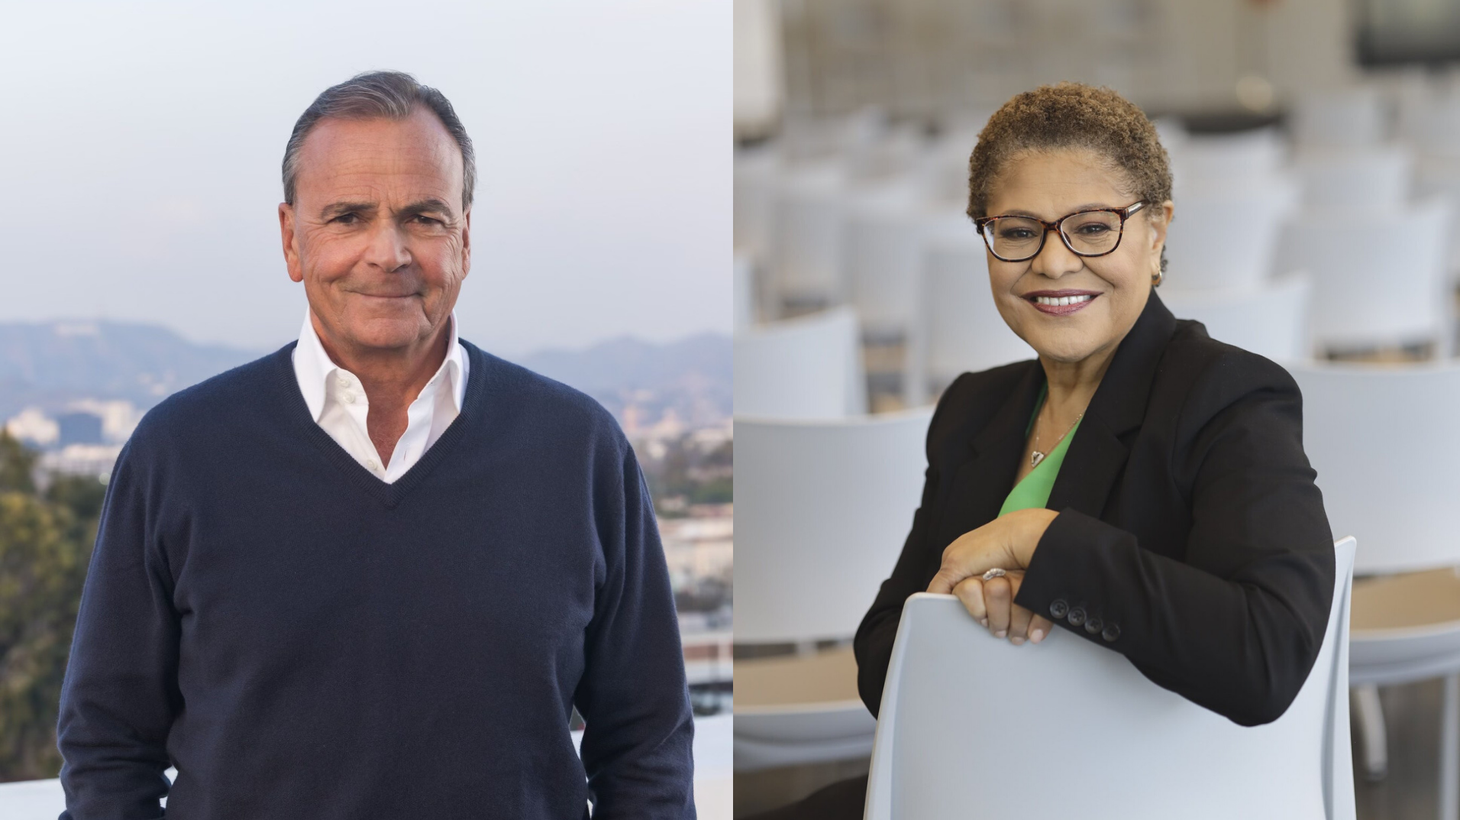 Rick Caruso and Karen Bass may not be highlighting the right accomplishments for their LA mayoral bids. Instead they “have built campaigns on our misperceptions and ignorance about how LA and California work,” according to columnist Joe Matthews.